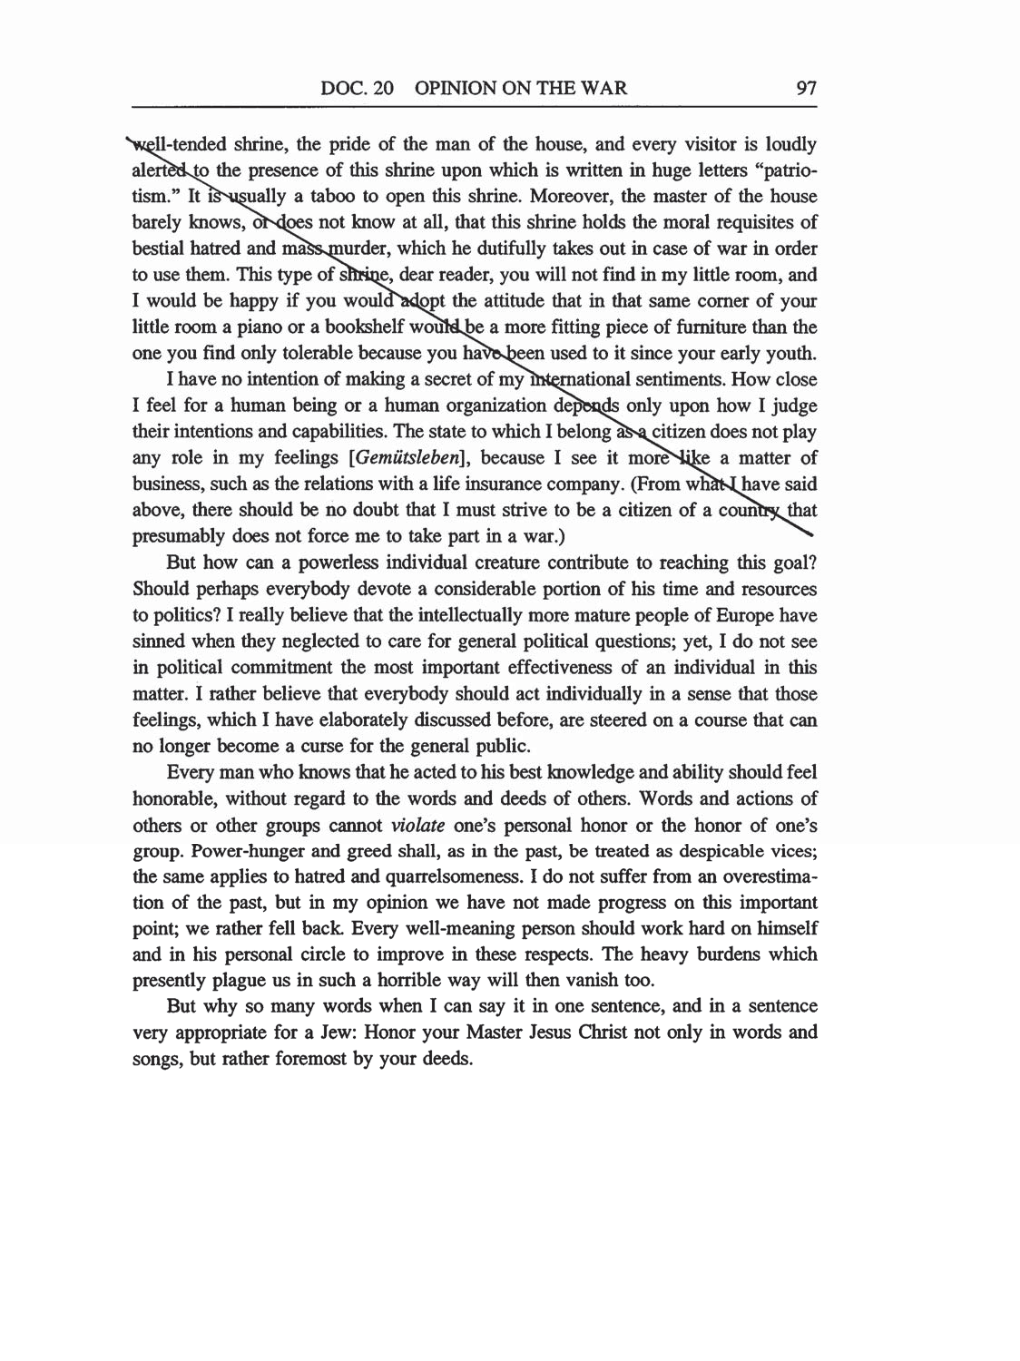 Volume 6: The Berlin Years: Writings, 1914-1917 (English translation supplement) page 97